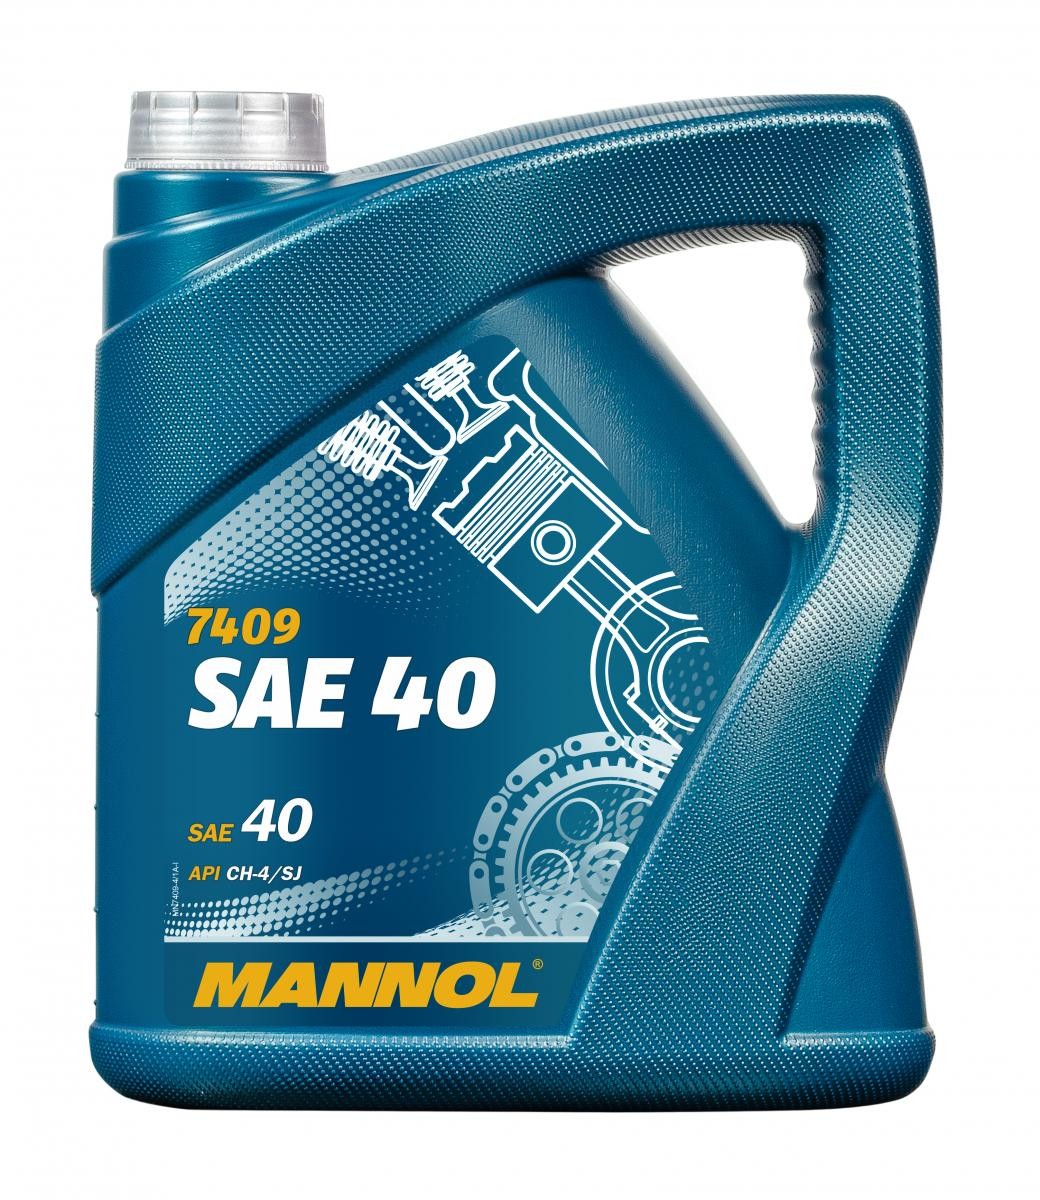 MANNOL MN74094 Multi-function Oil Canister